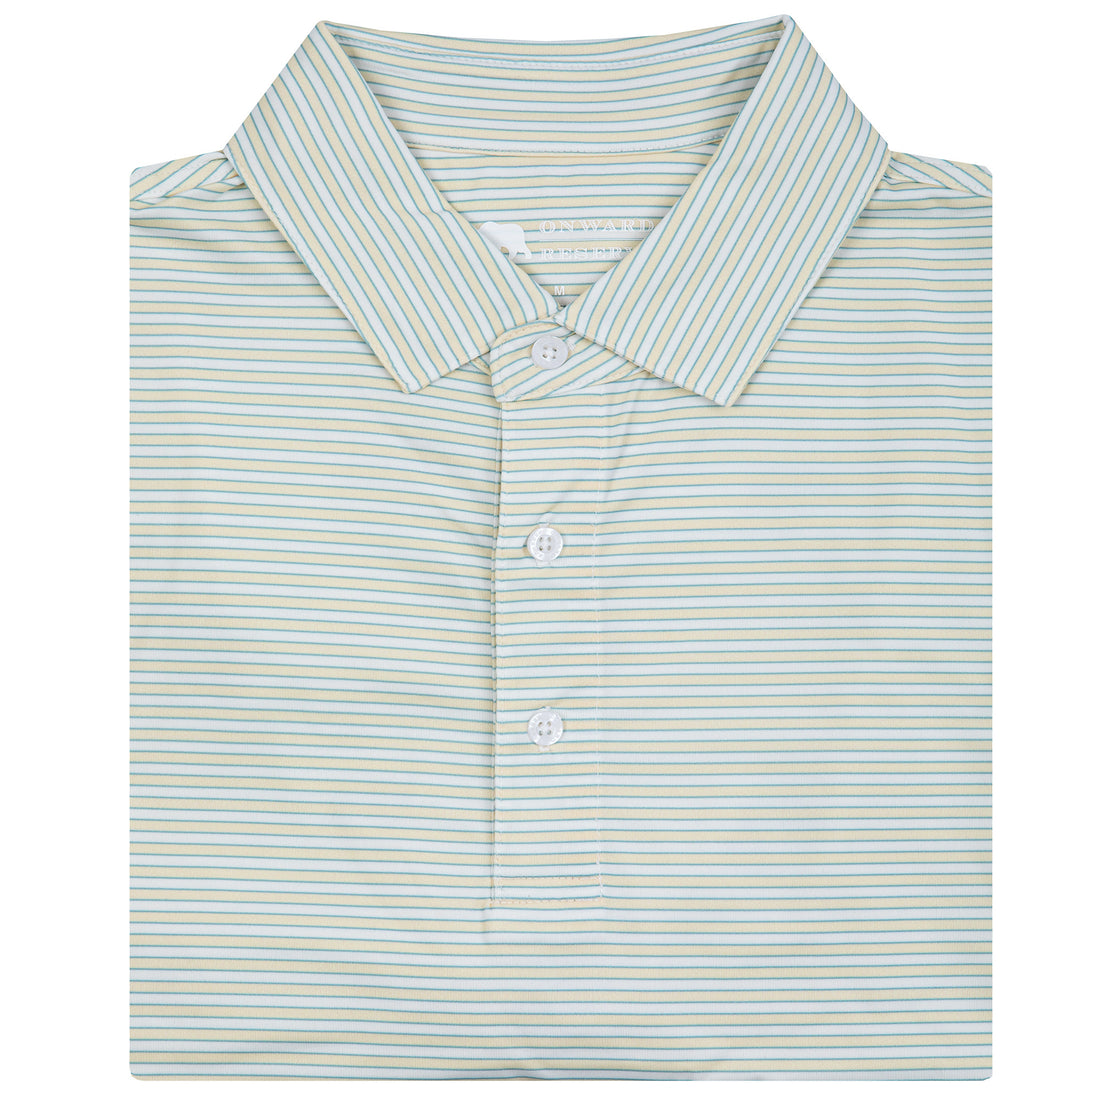 Onward Reserve Mulligan Striped Performance Polo- Pastel Yellow/Ether